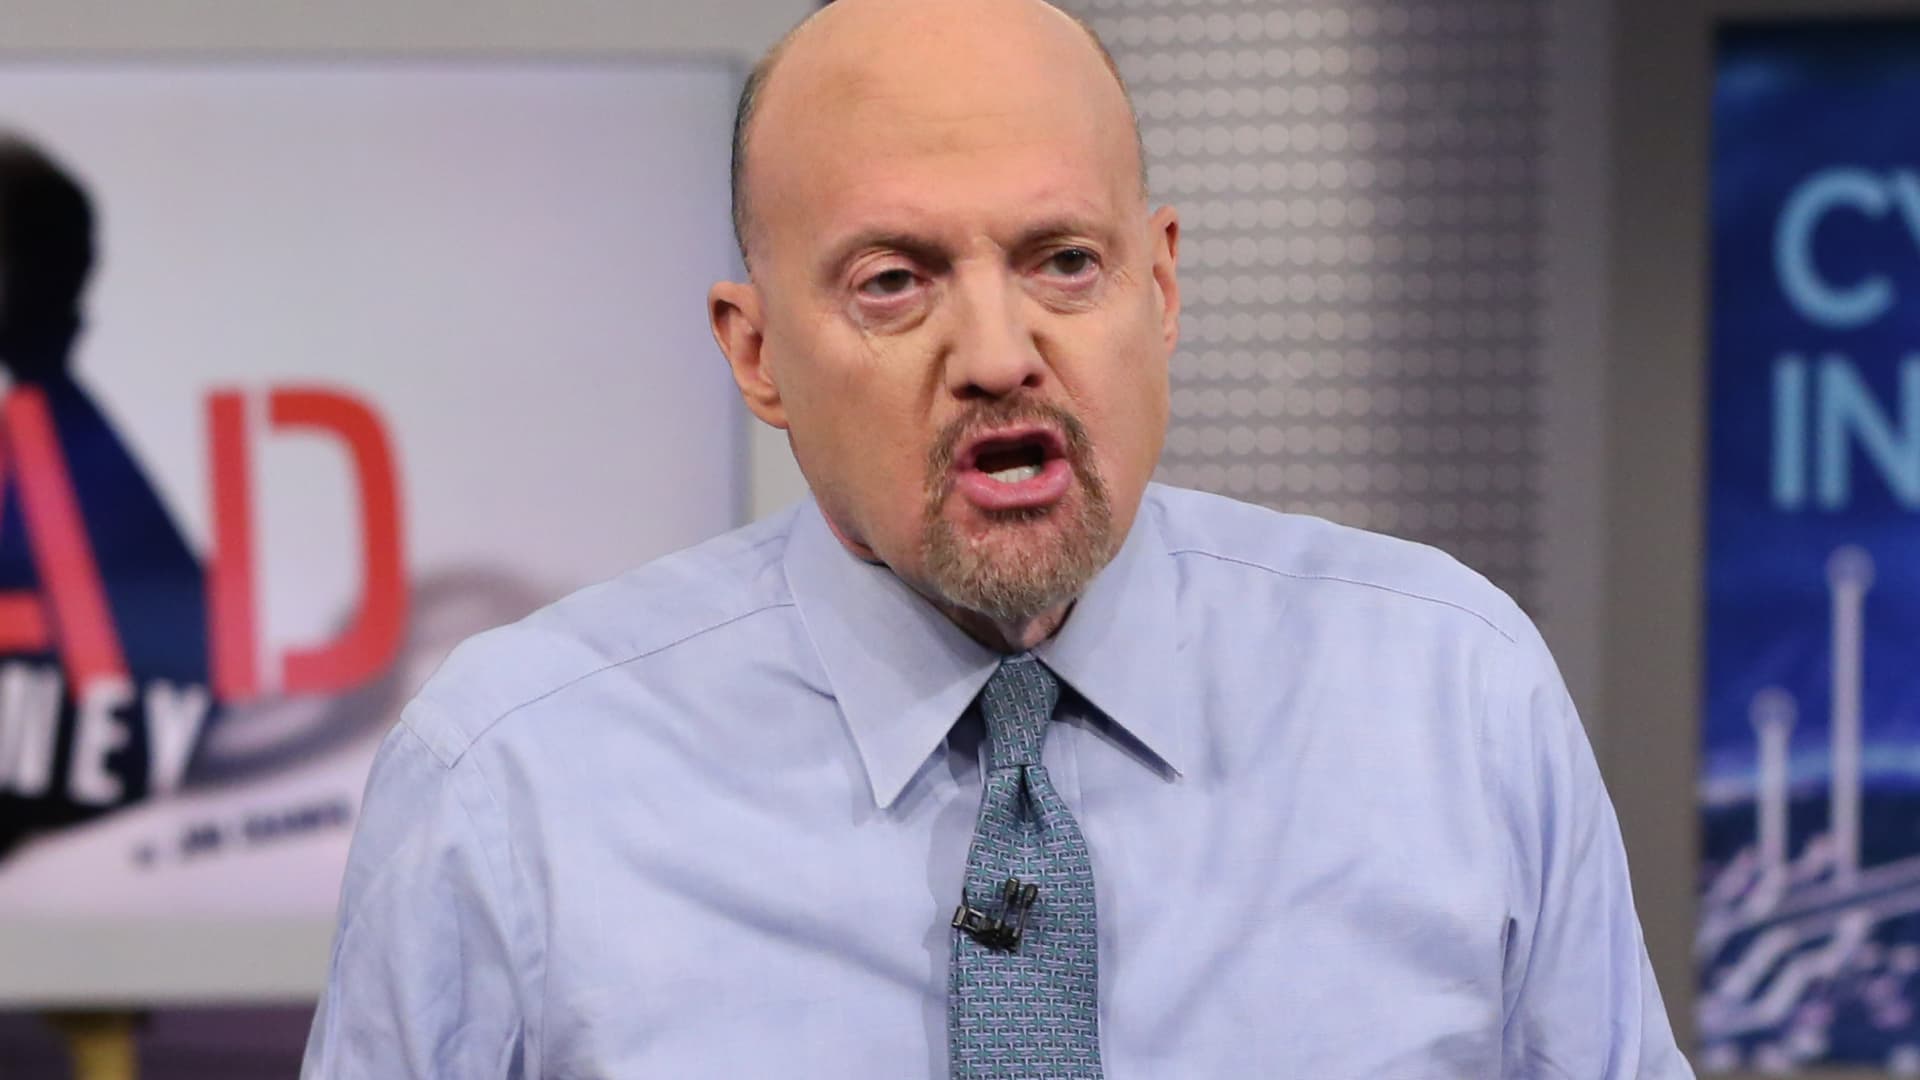 Jim Cramer's week ahead: Nonfarm payroll data and Disney's proxy fight comes to a head - CNBC